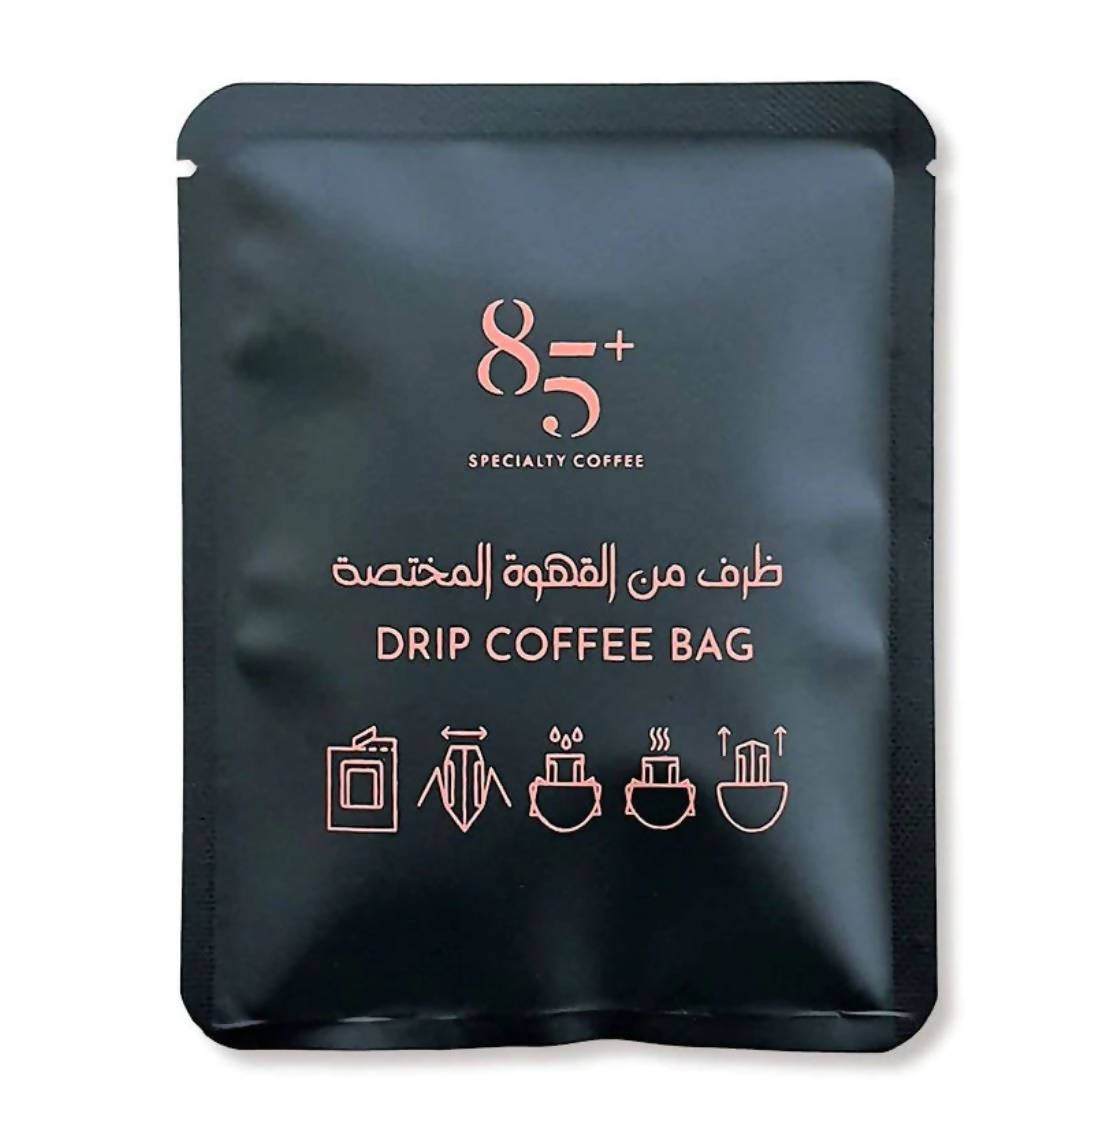 Yemen - Drip Bags (8 packets) - BeanBurds 85+ Specialty Coffee